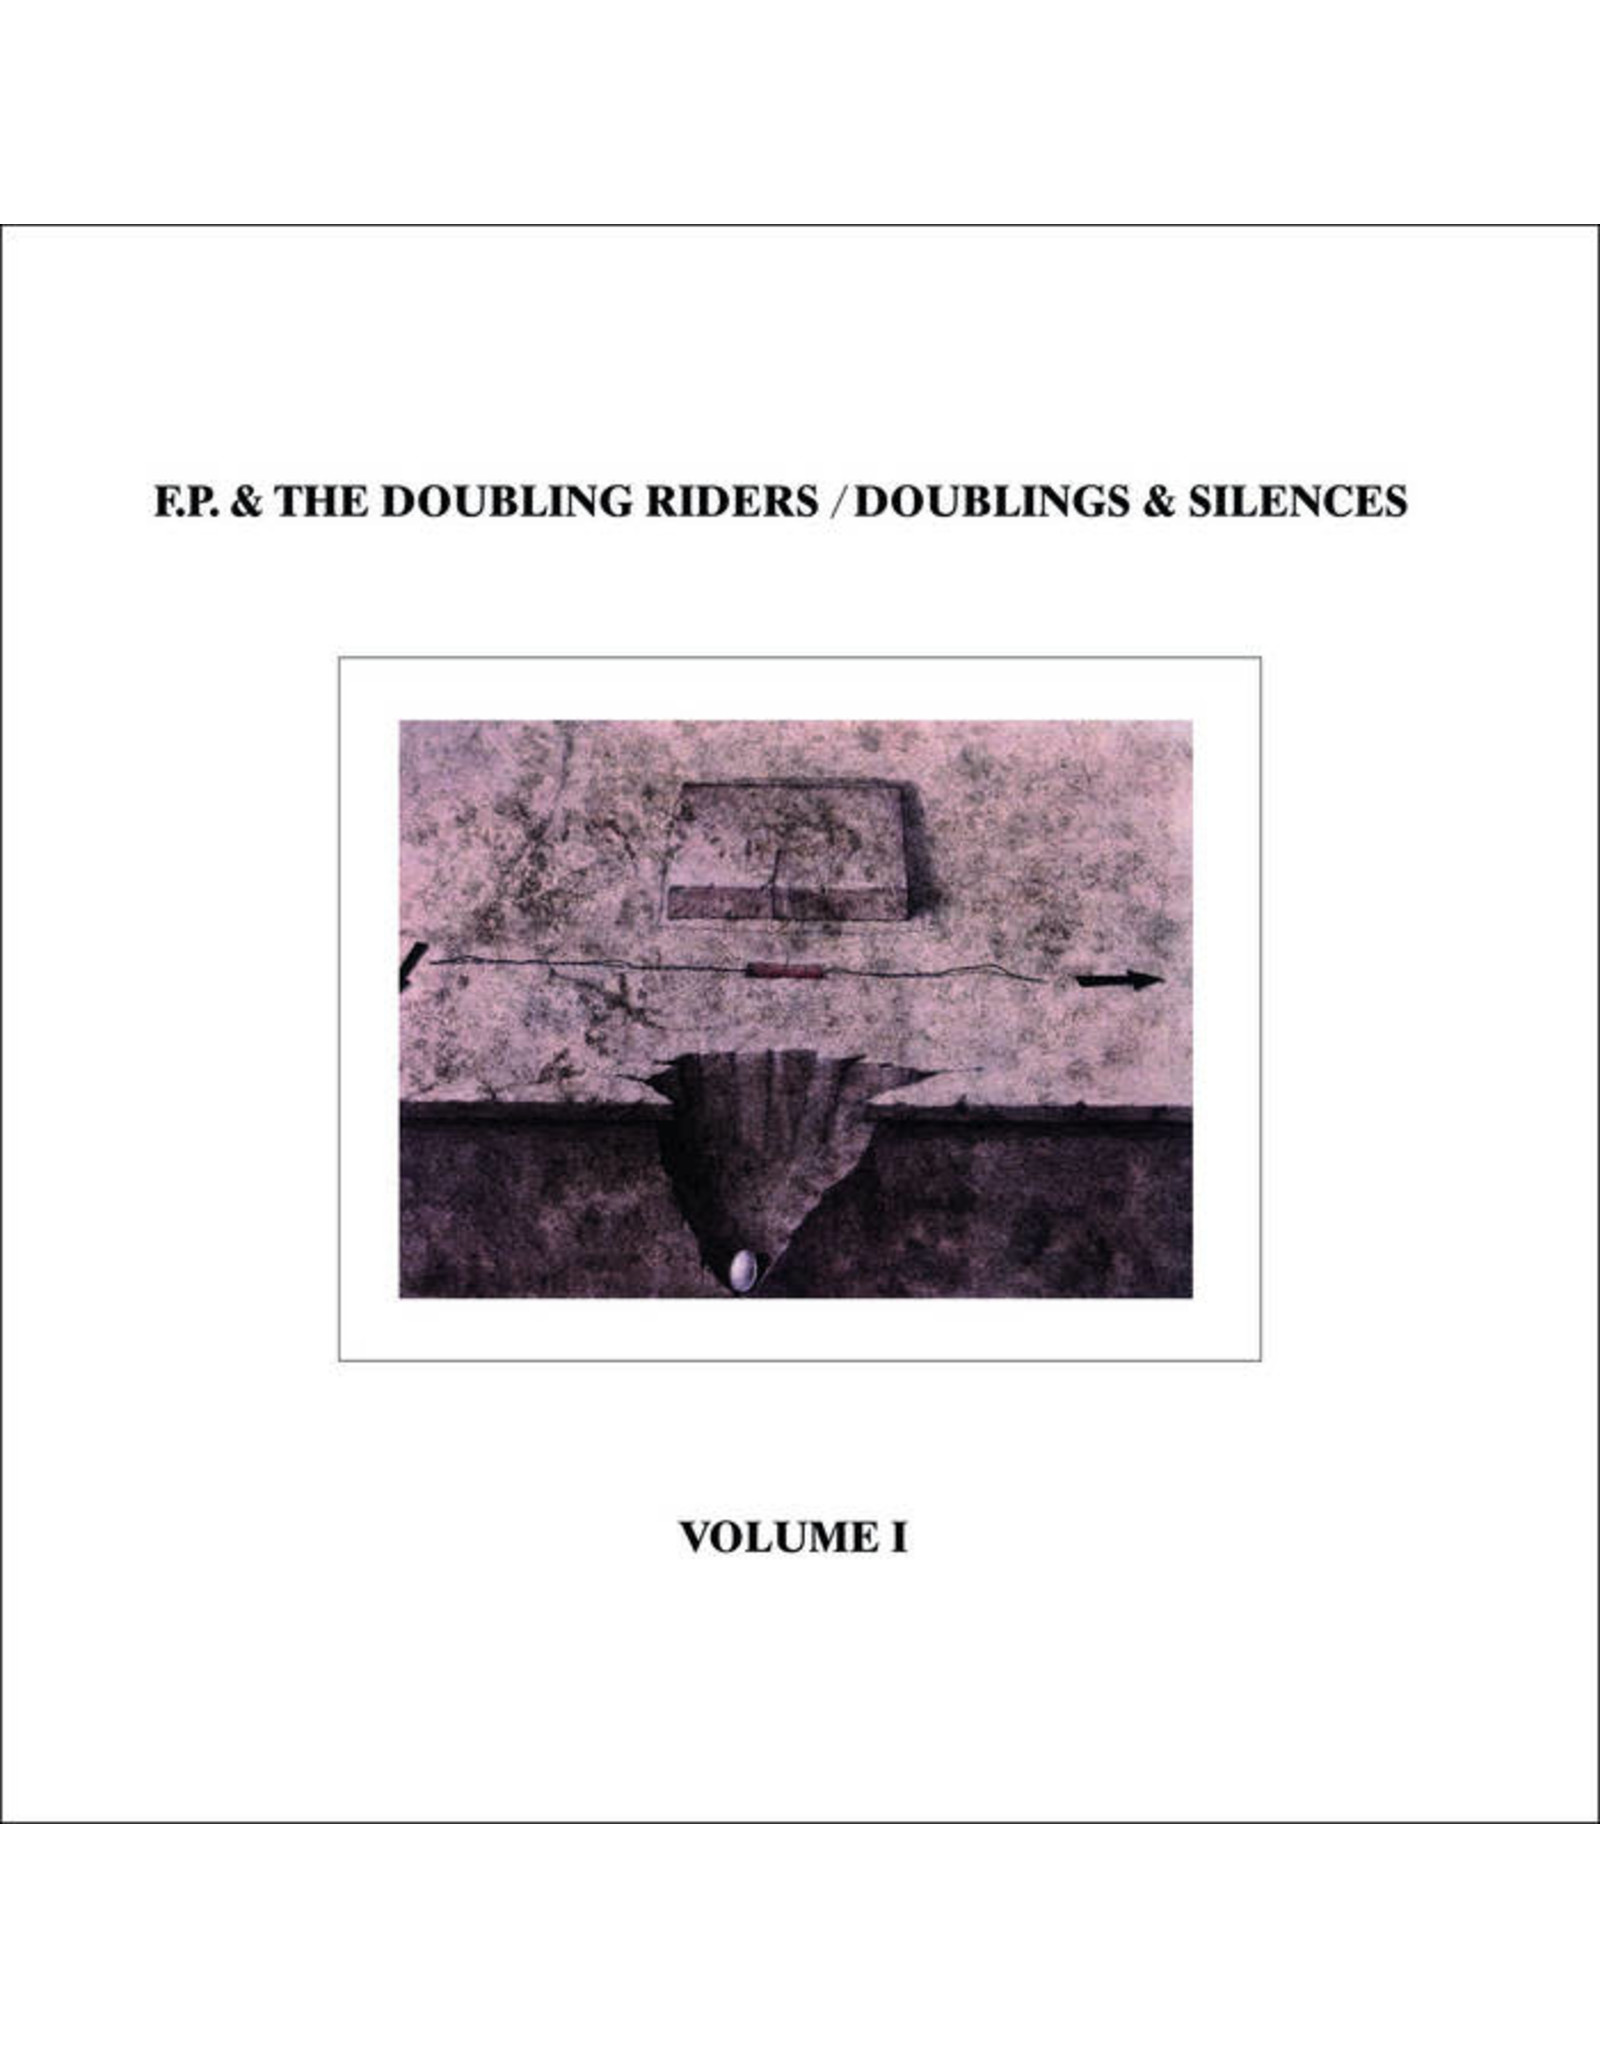 B.F.E. F.P. & The Doubling Riders: Doublings & Silences Vol. 1 LP